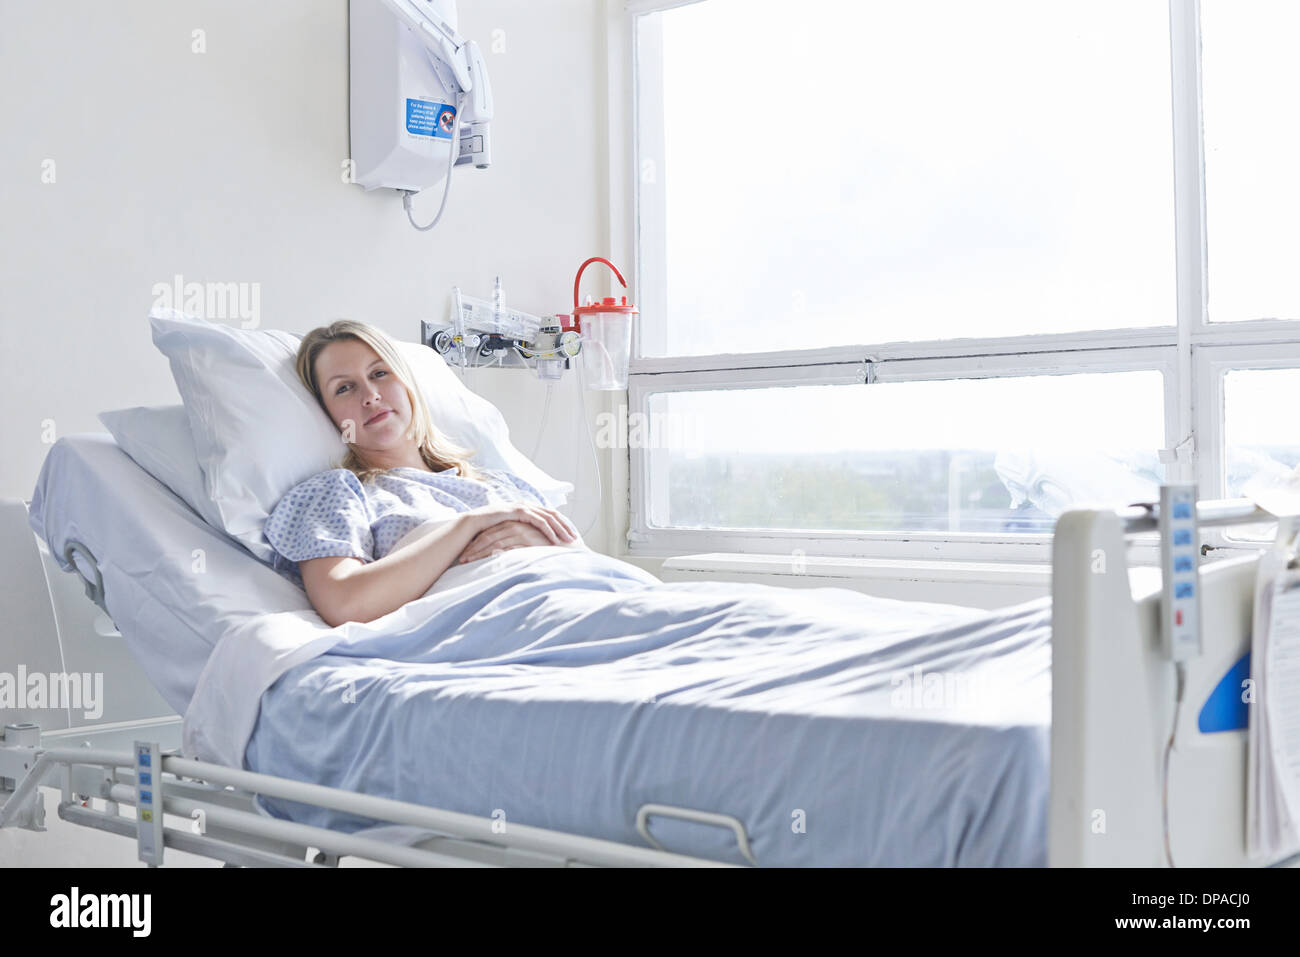 Patient lying in hospital bed Stock Photo